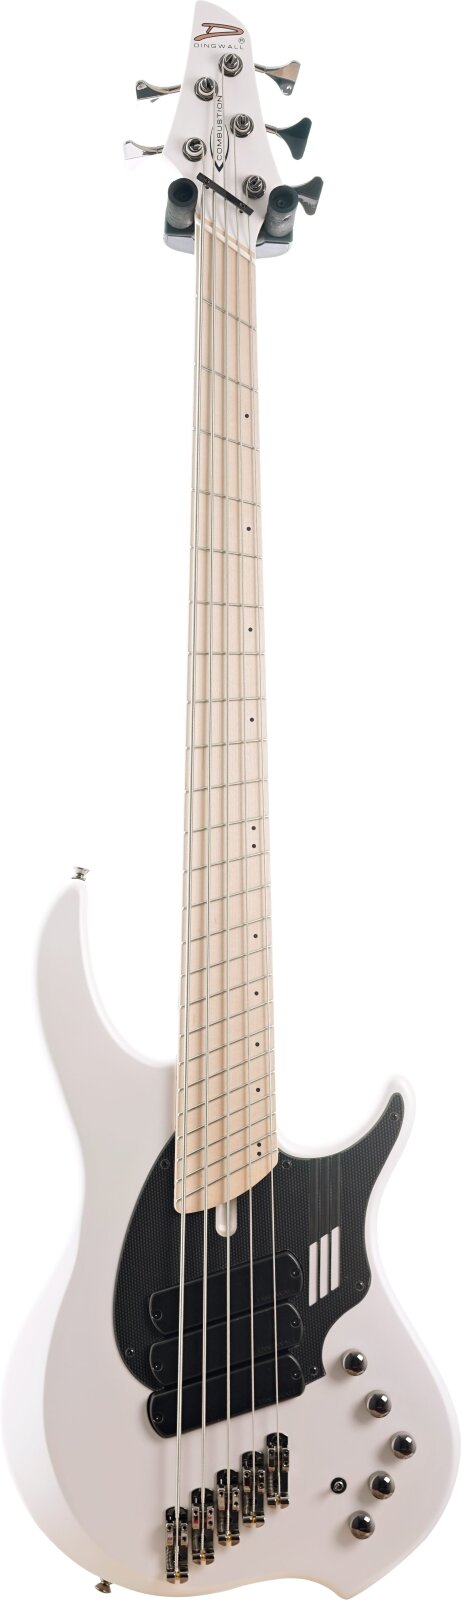 Dingwall NG3 Nolly signature 5 string maple fingerboard Ducati Pearl White : photo 1